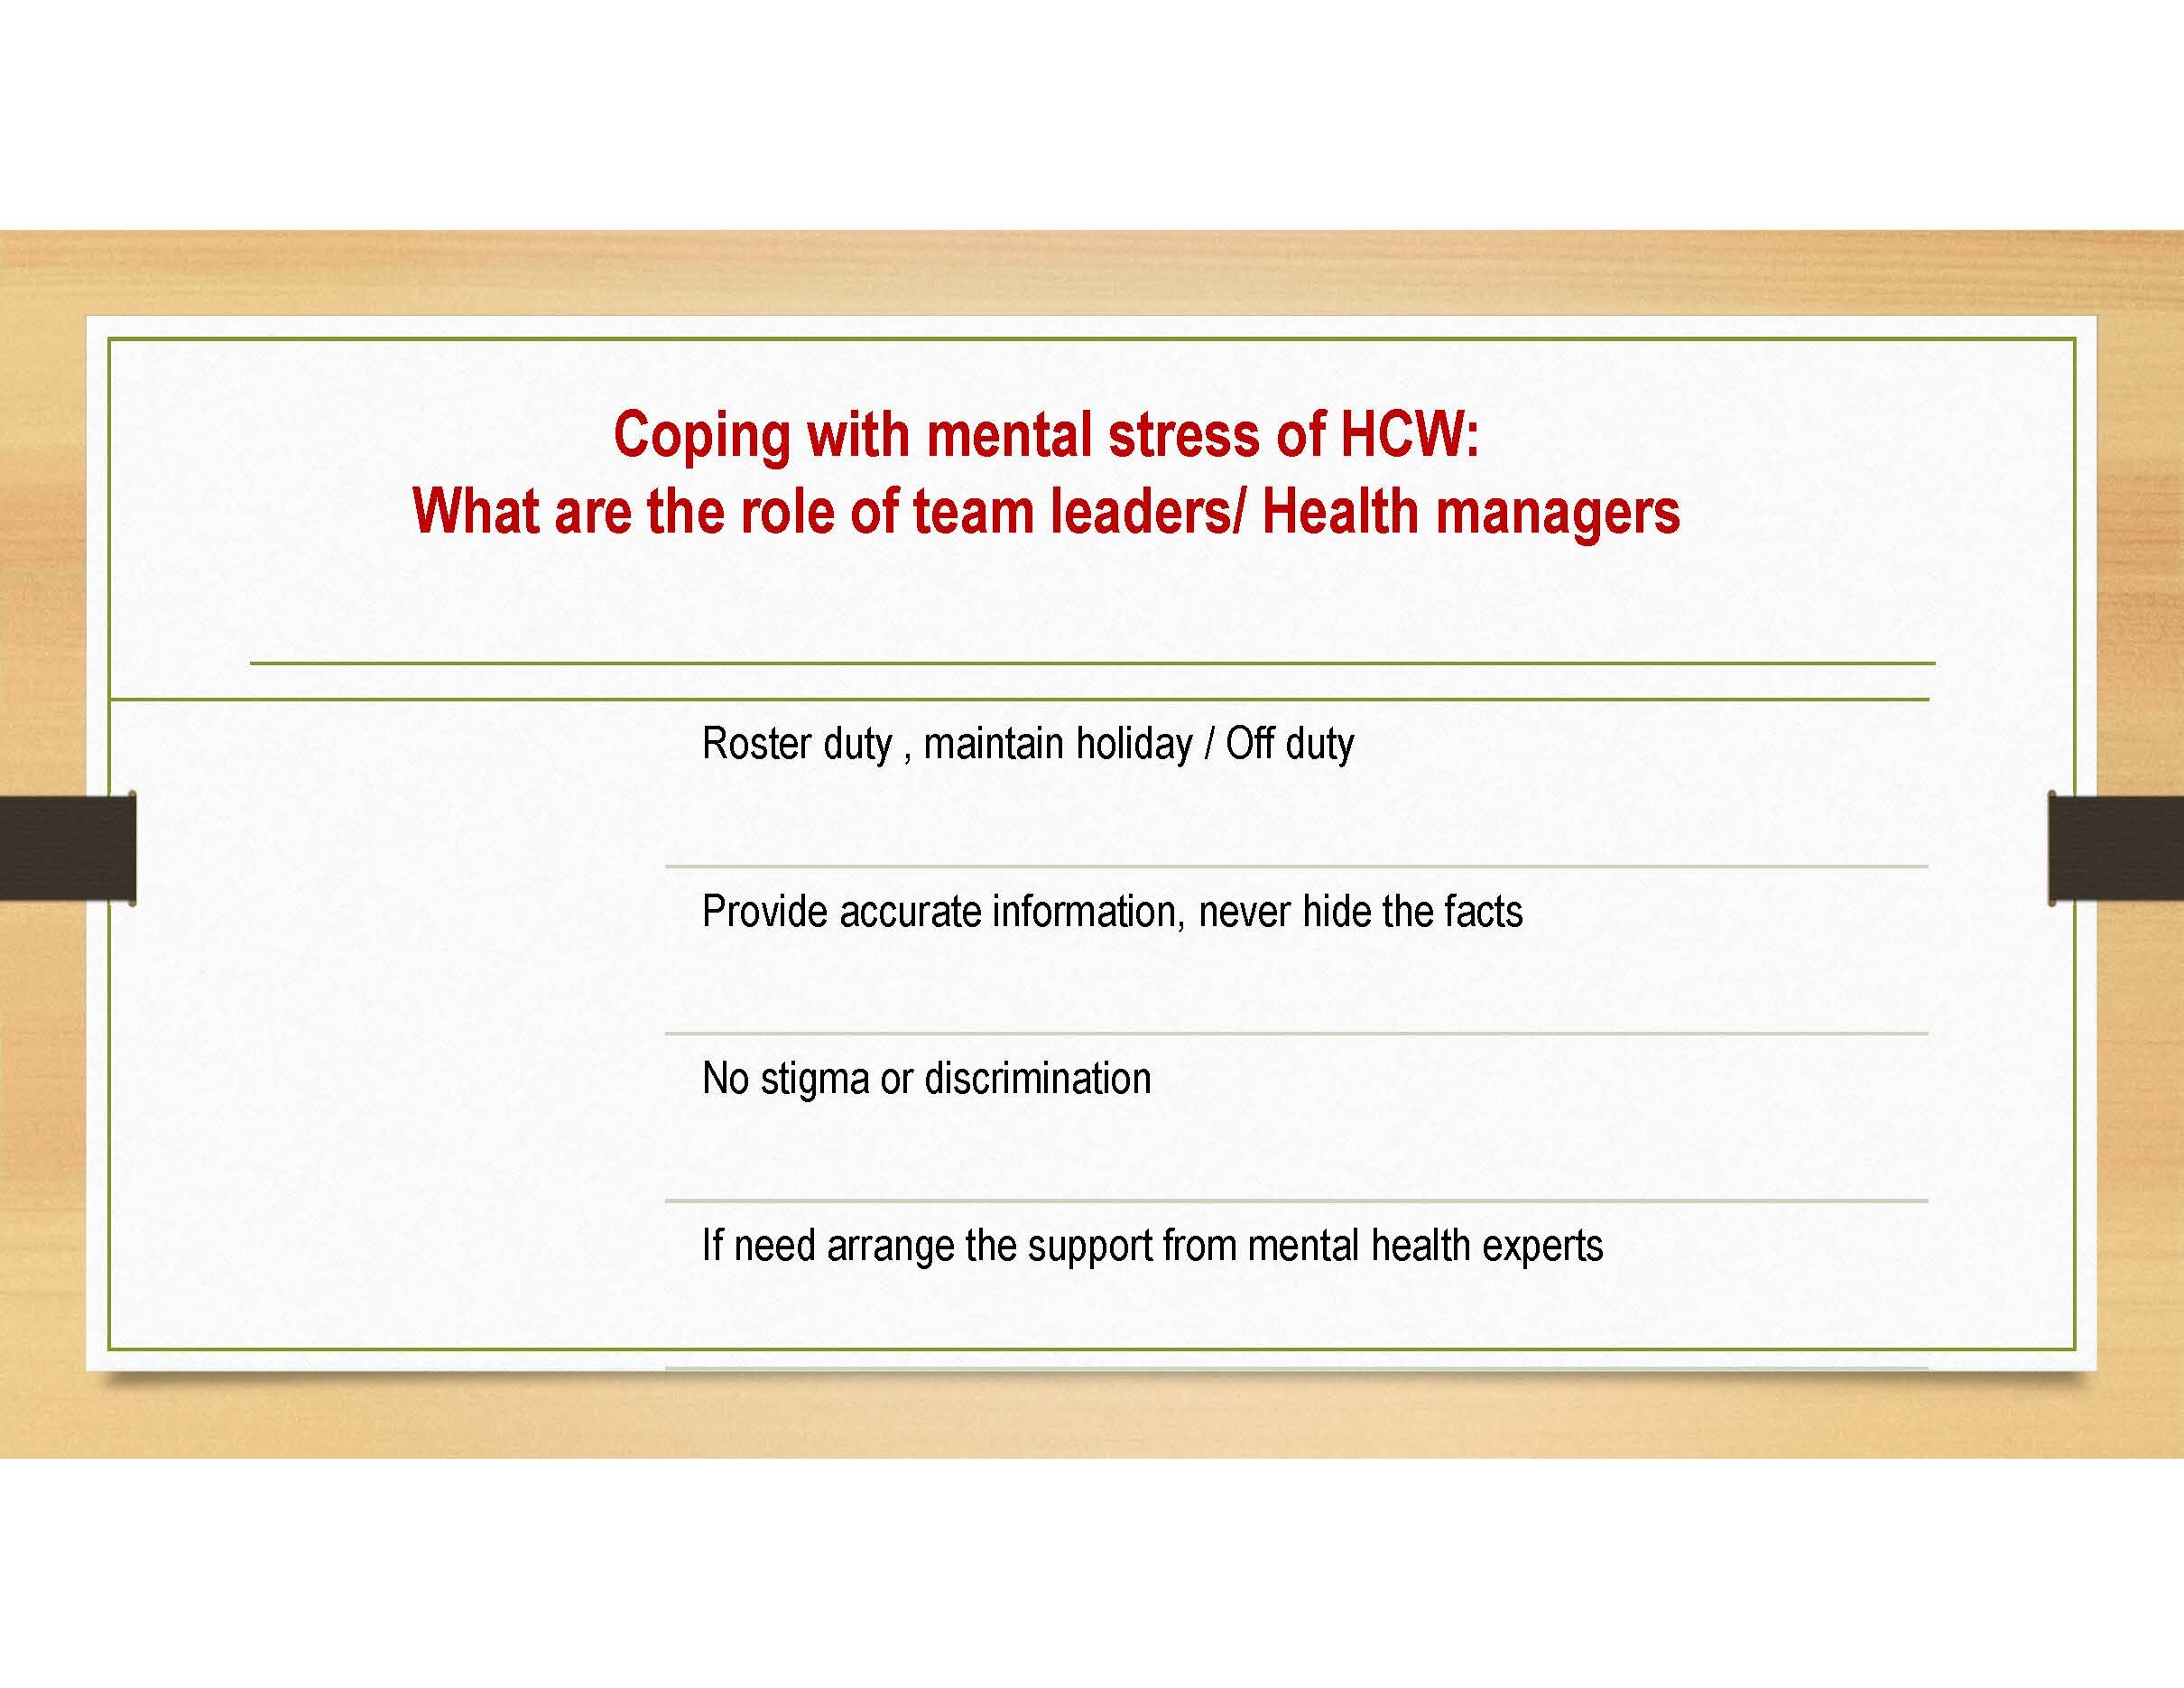 RTM_Session 1_Mental Health in COVID 19_Page_21.jpg